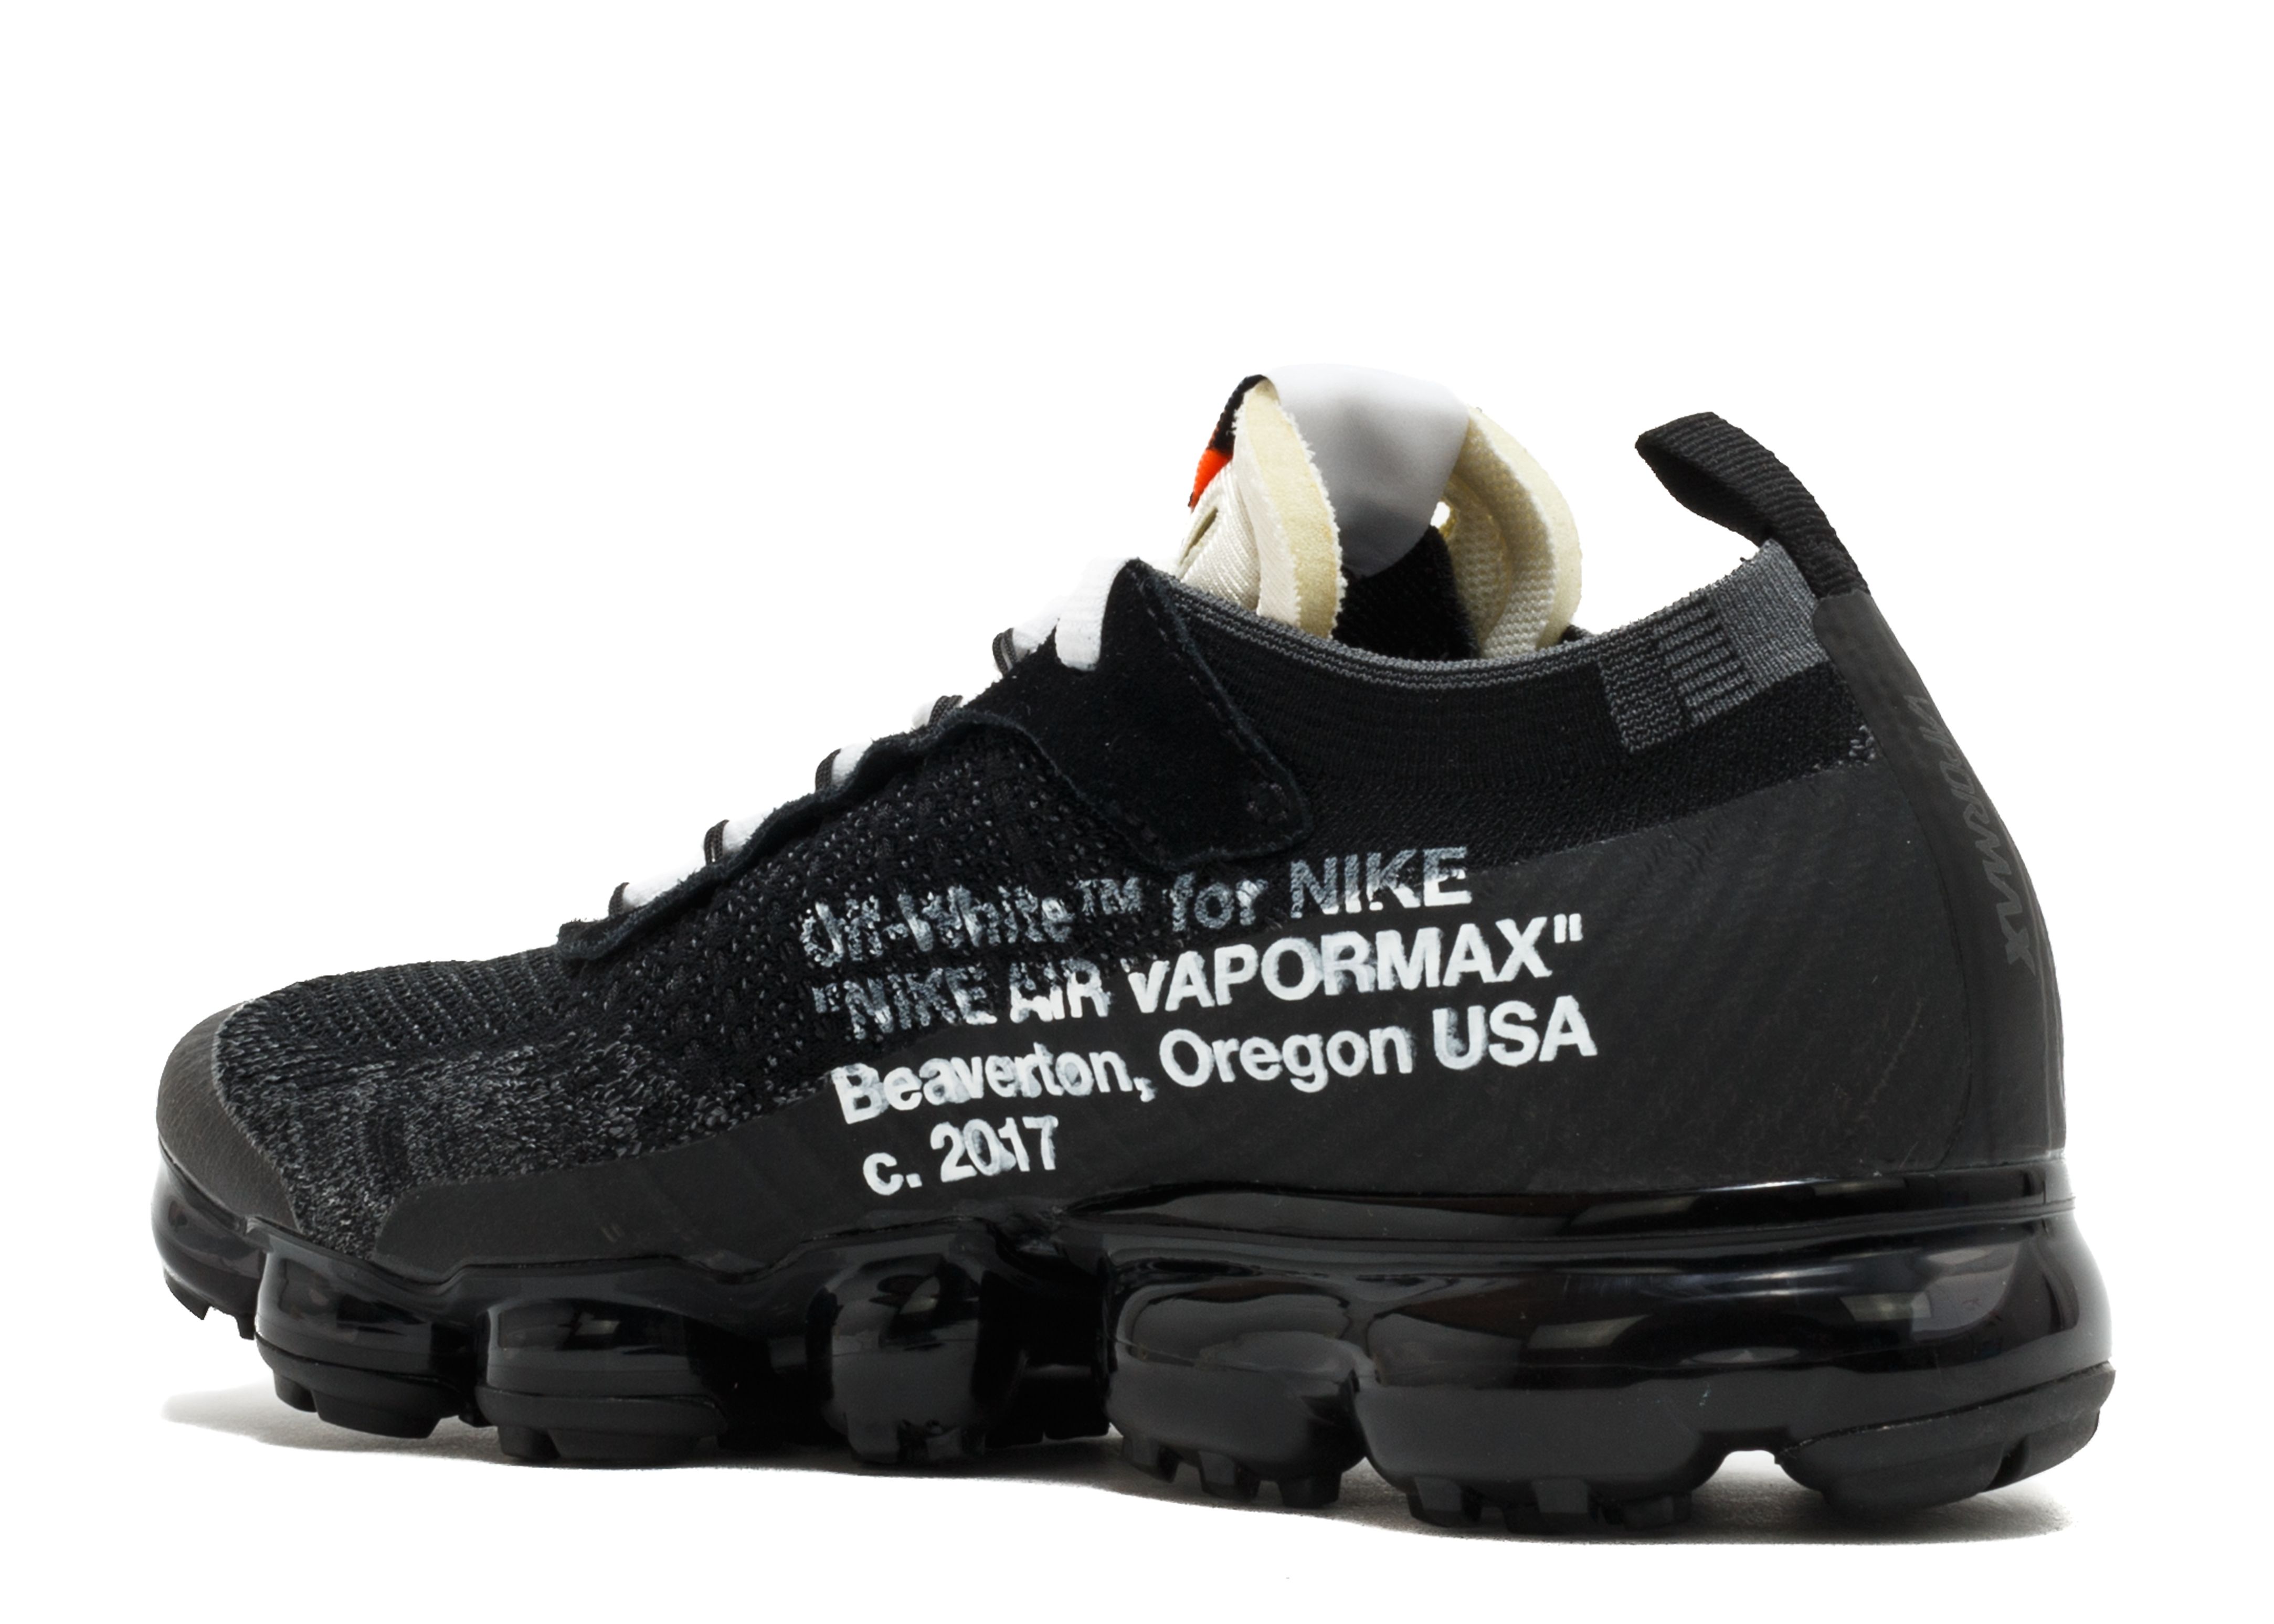 nike vapormax off white 2017 off 58% - axnosis.co.uk